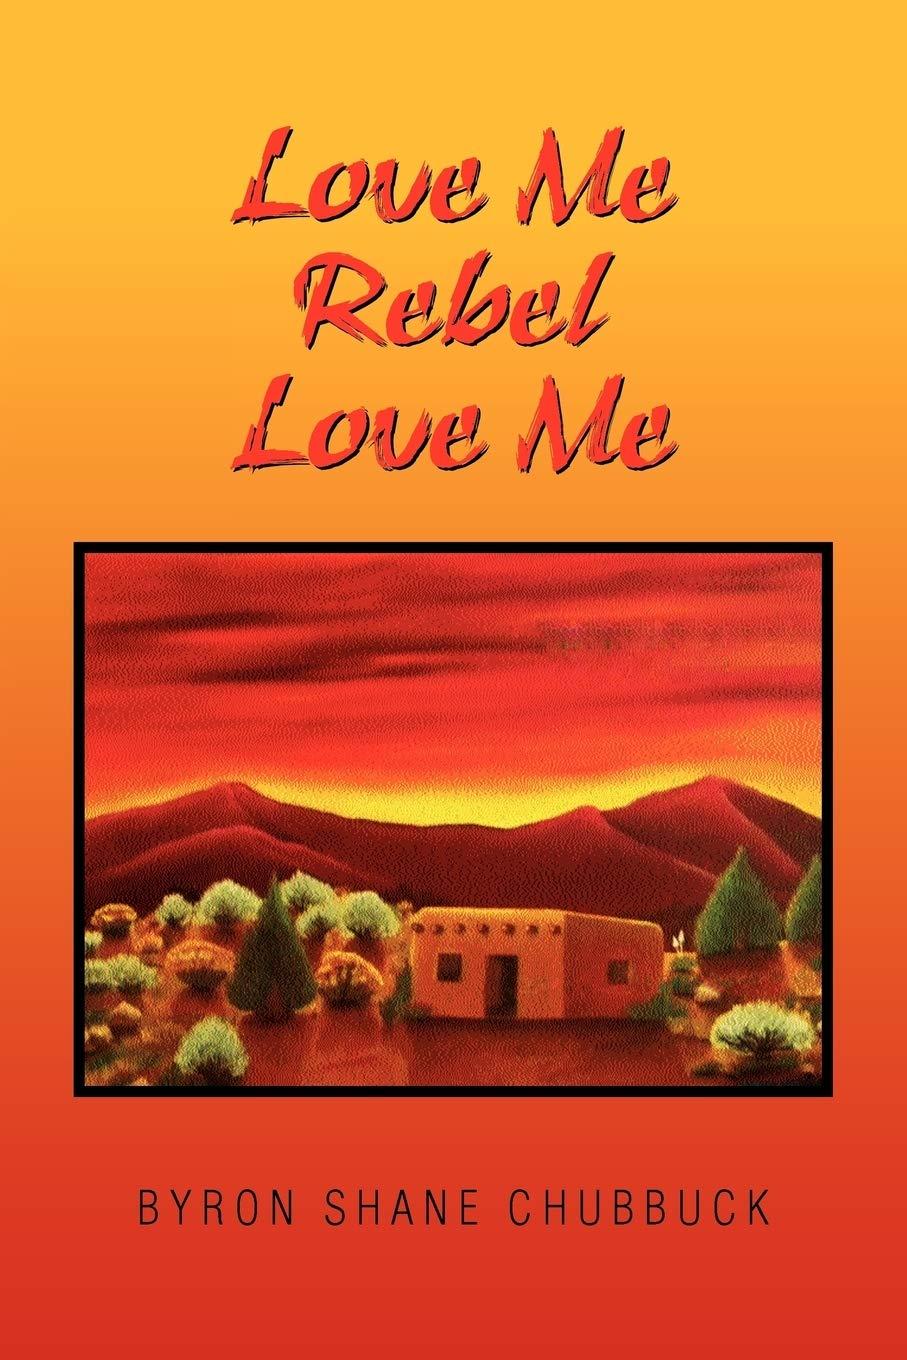 Love Me Rebel Love Me: Poetry by Oso Blanco now available!